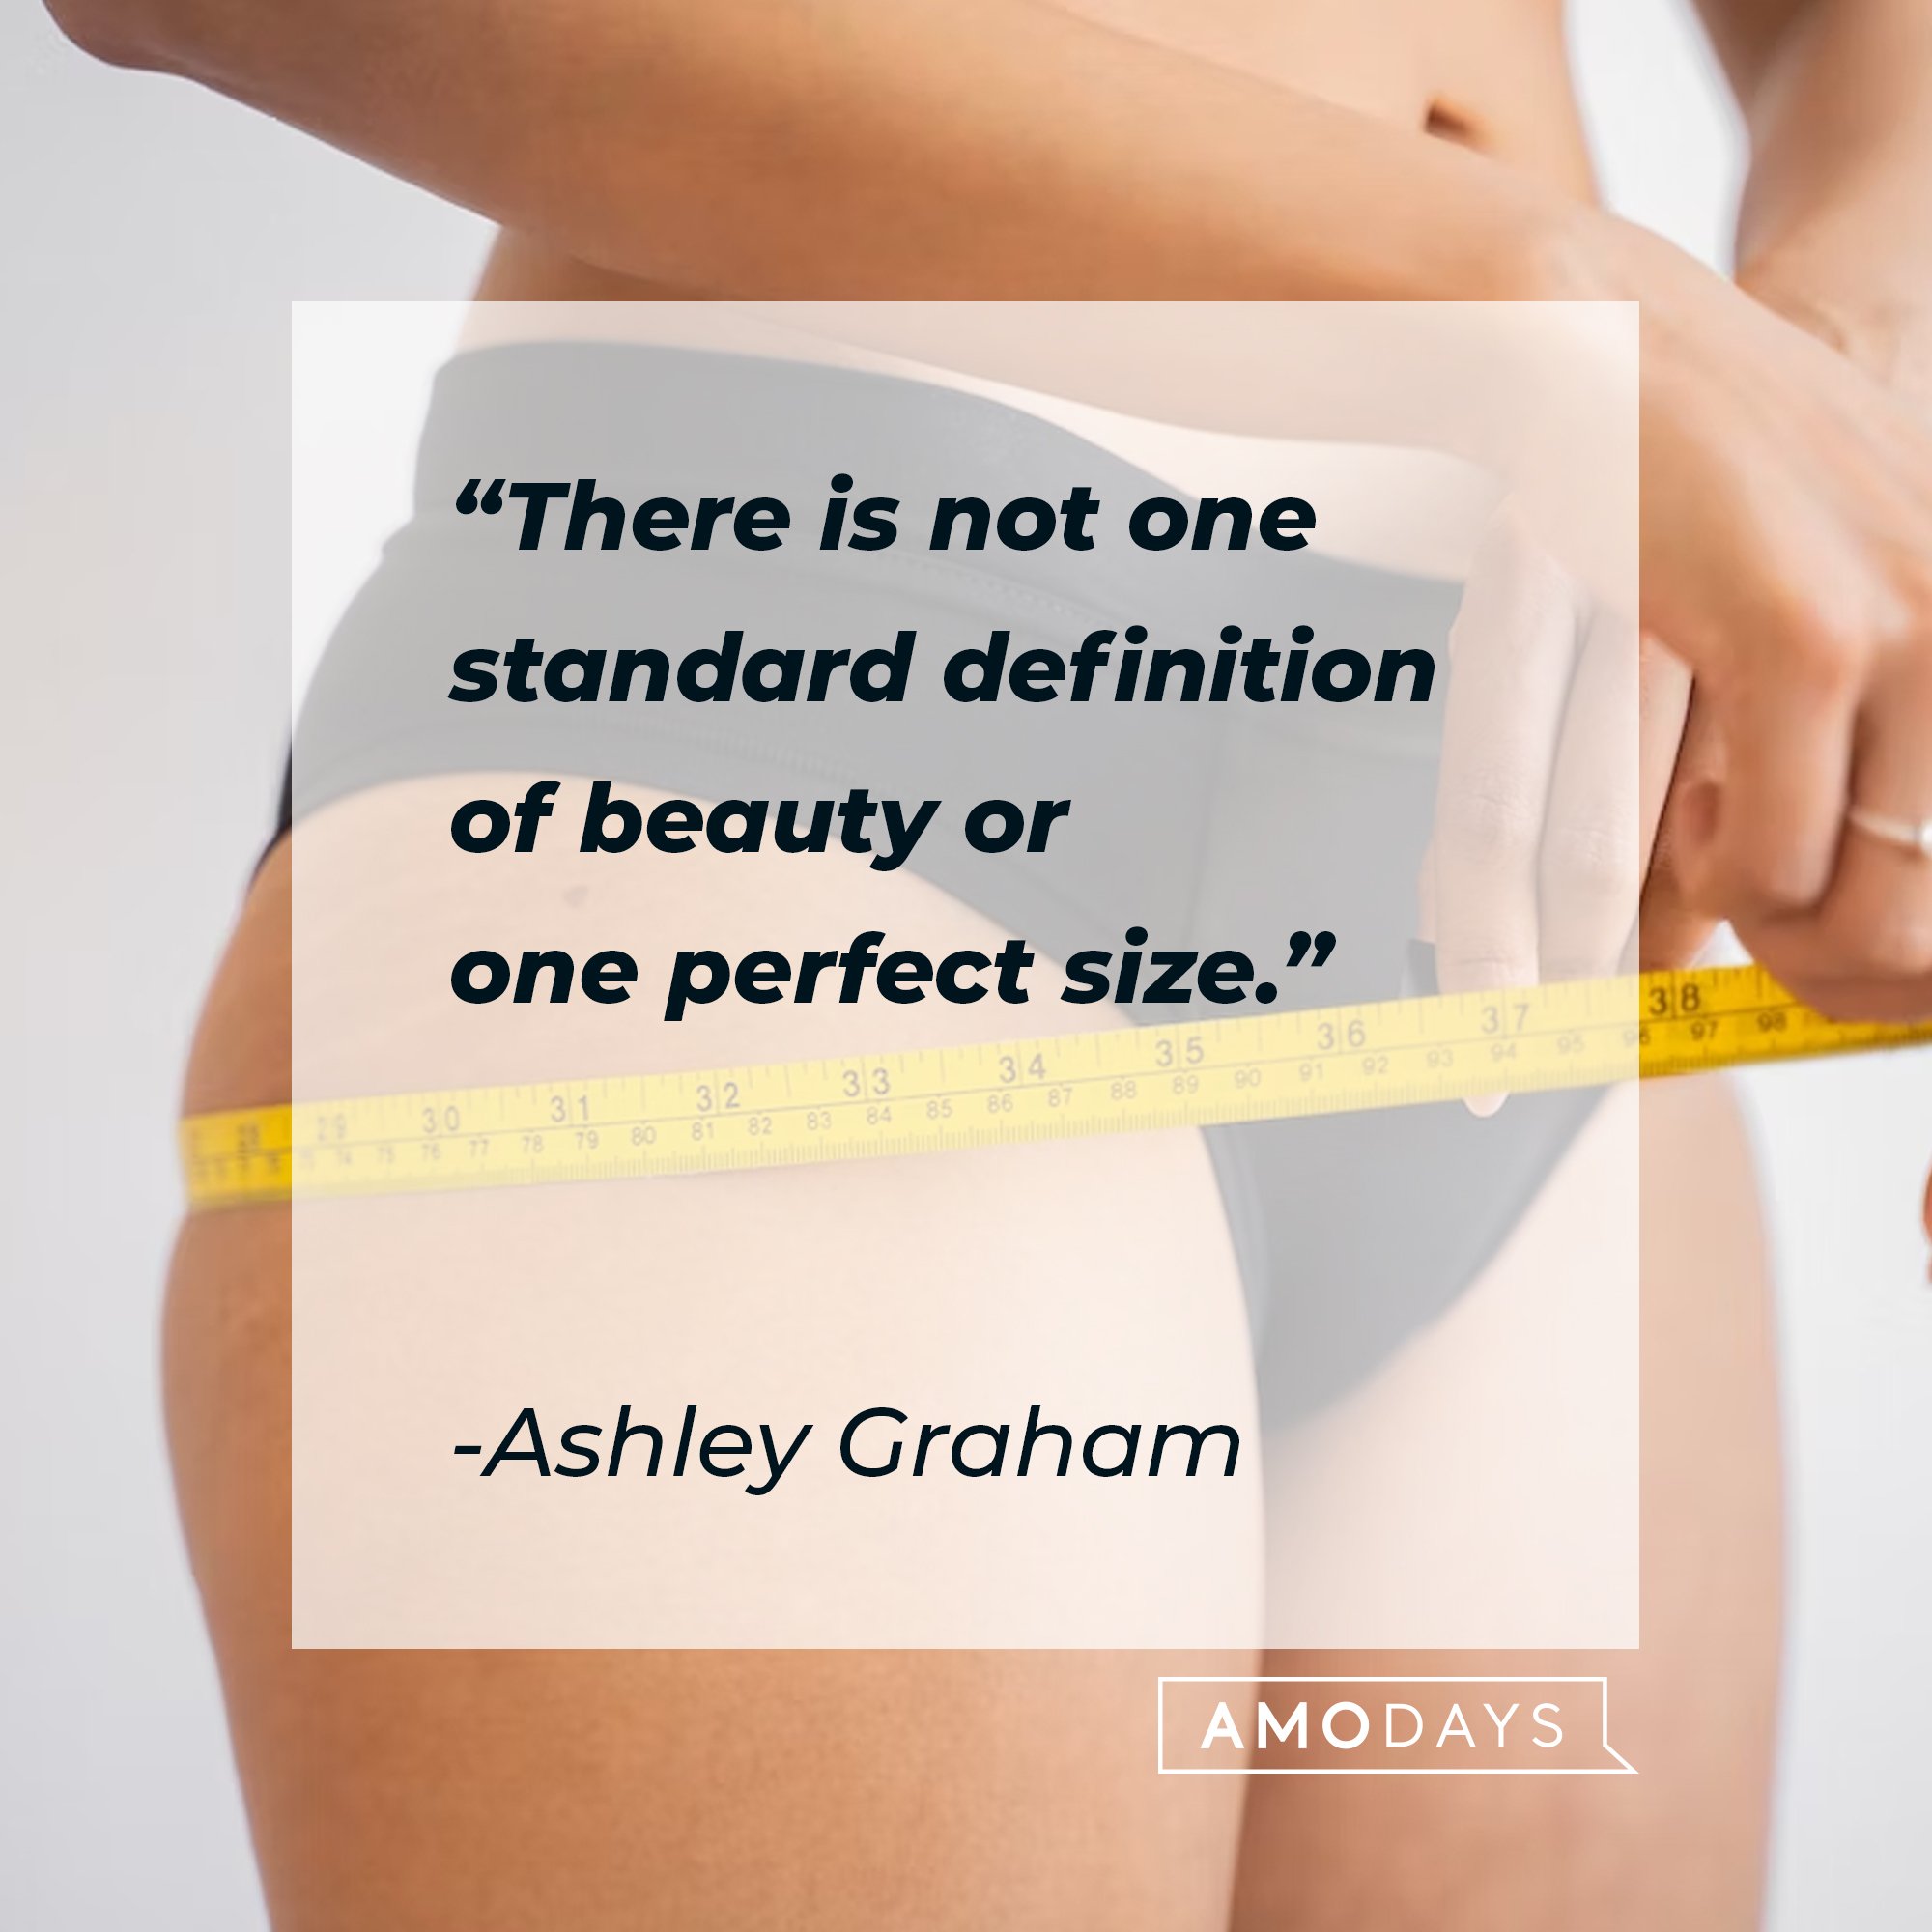 Ashley Graham’s quote: "There is not one standard definition of beauty or one perfect size." | Image: AmoDays